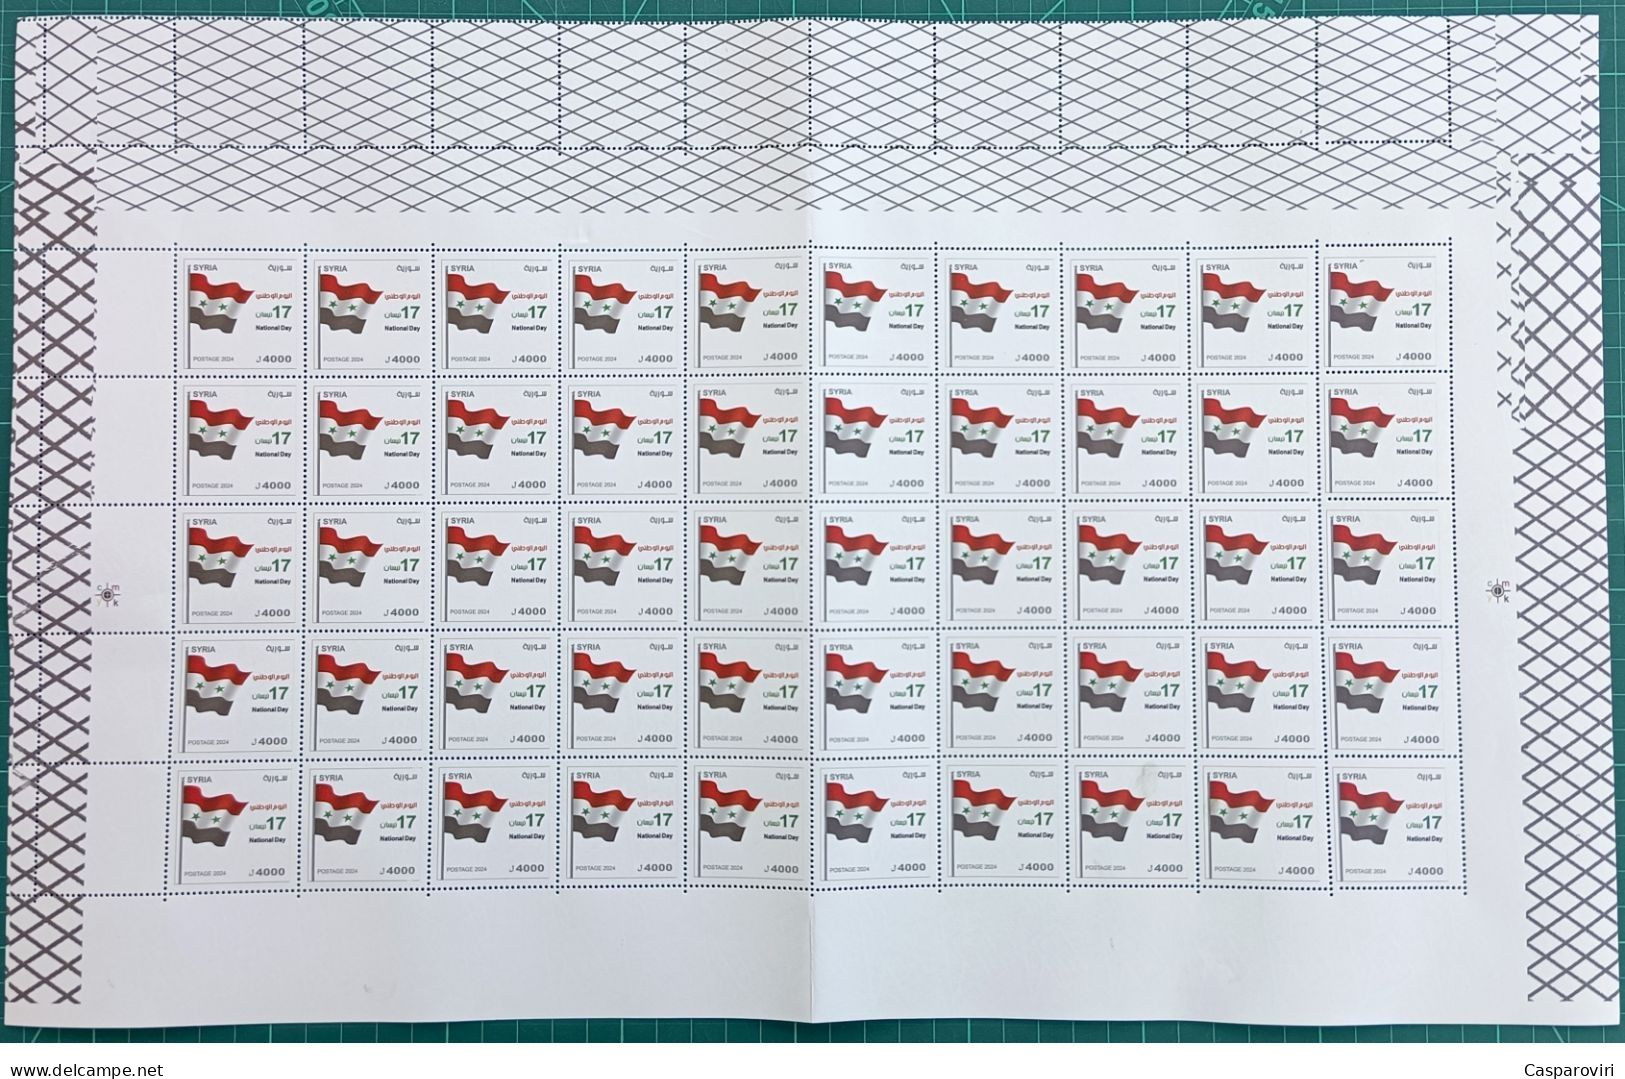 2024204; Syria; 2024; FULL SHEET; National Day Stamp; MNH** - Syrie